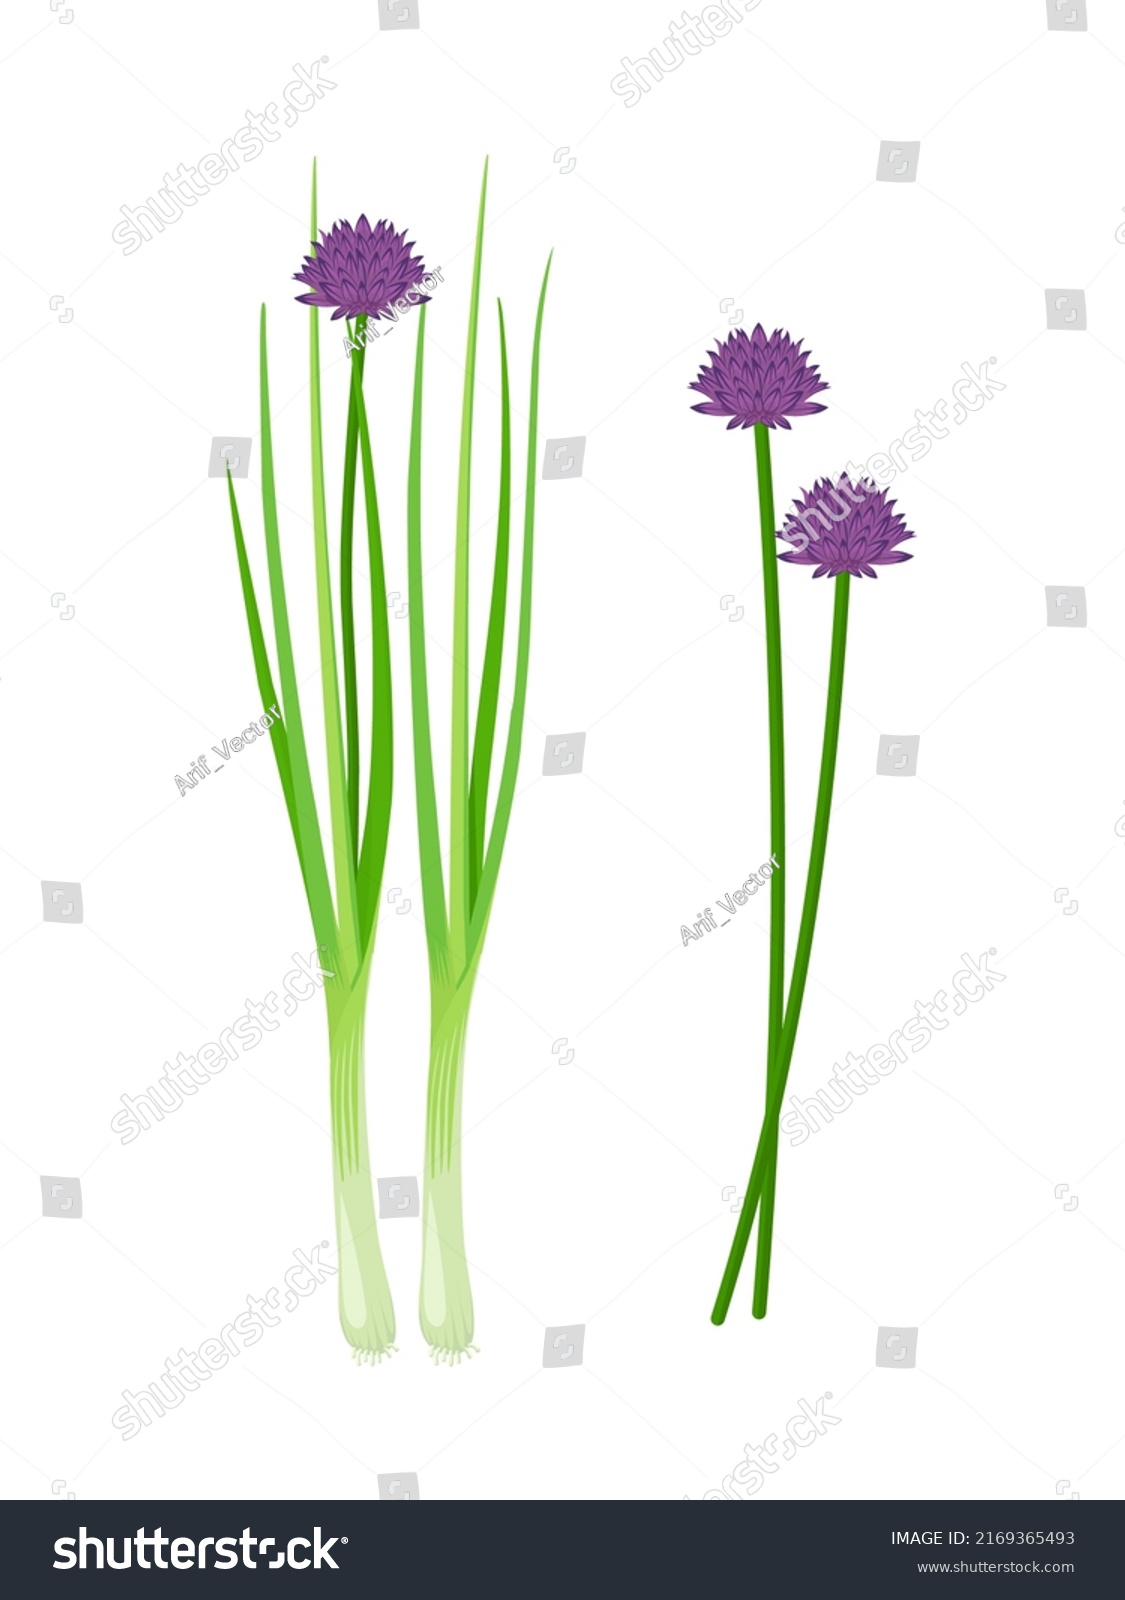 SVG of Vector illustration, fresh chives with flowers, scientific name Allium schoenoprasum, isolated on white background. svg